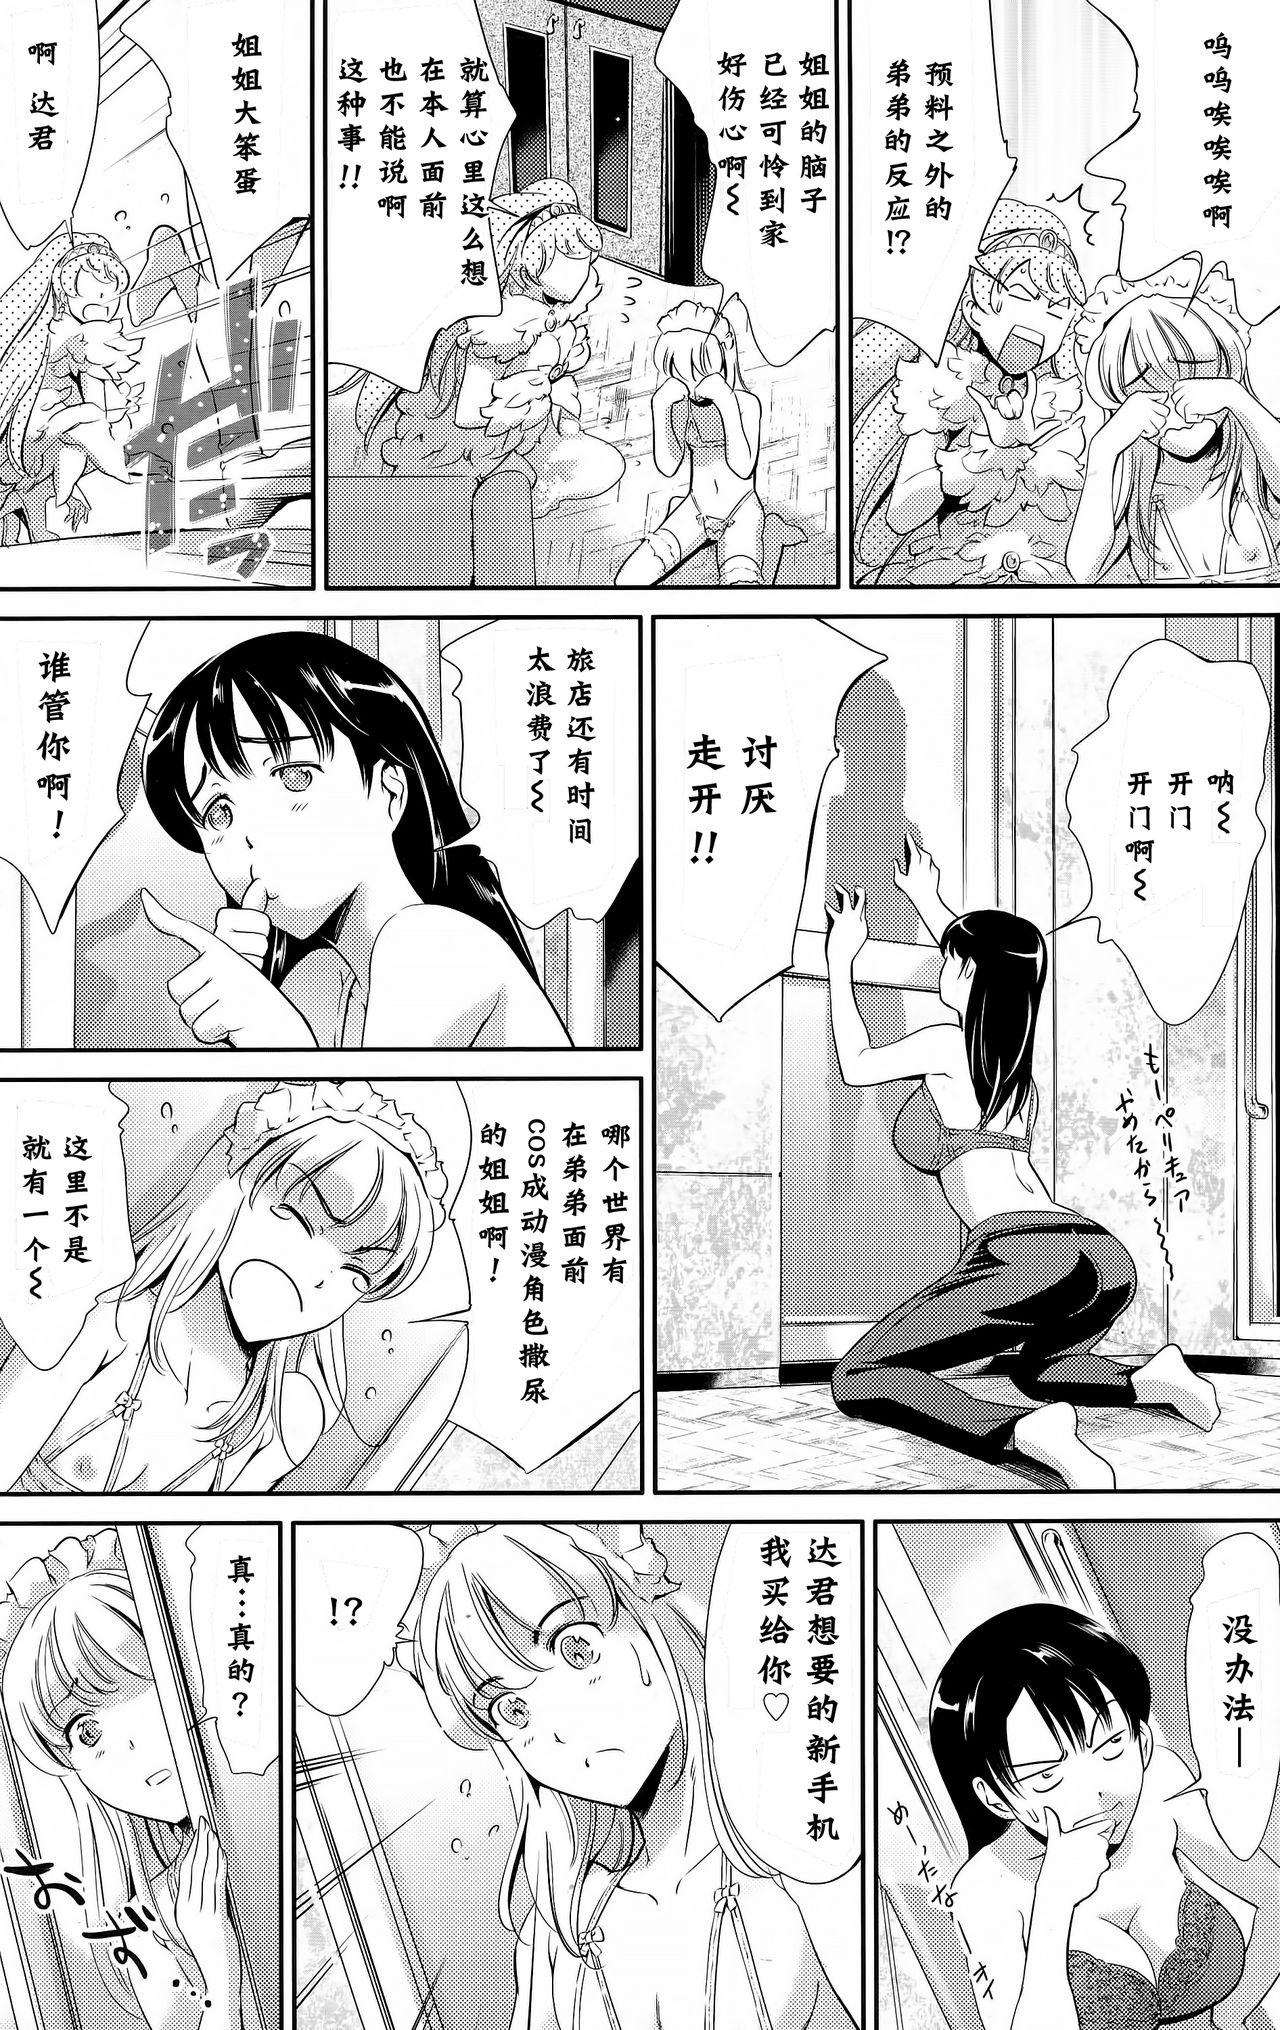 Load Onee-chan no Kougeki!! Stepdaughter - Page 9